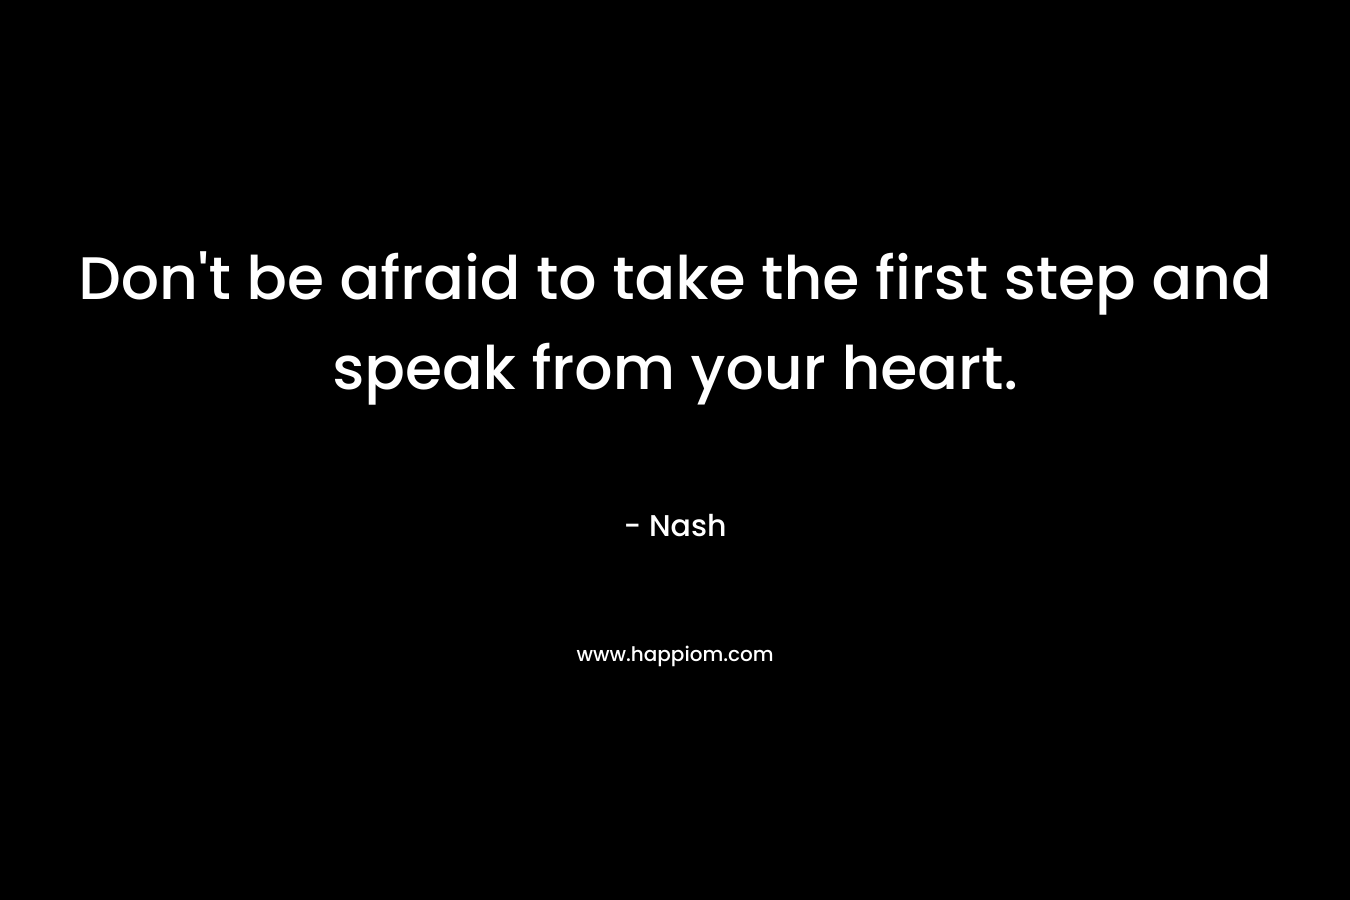 Don't be afraid to take the first step and speak from your heart.